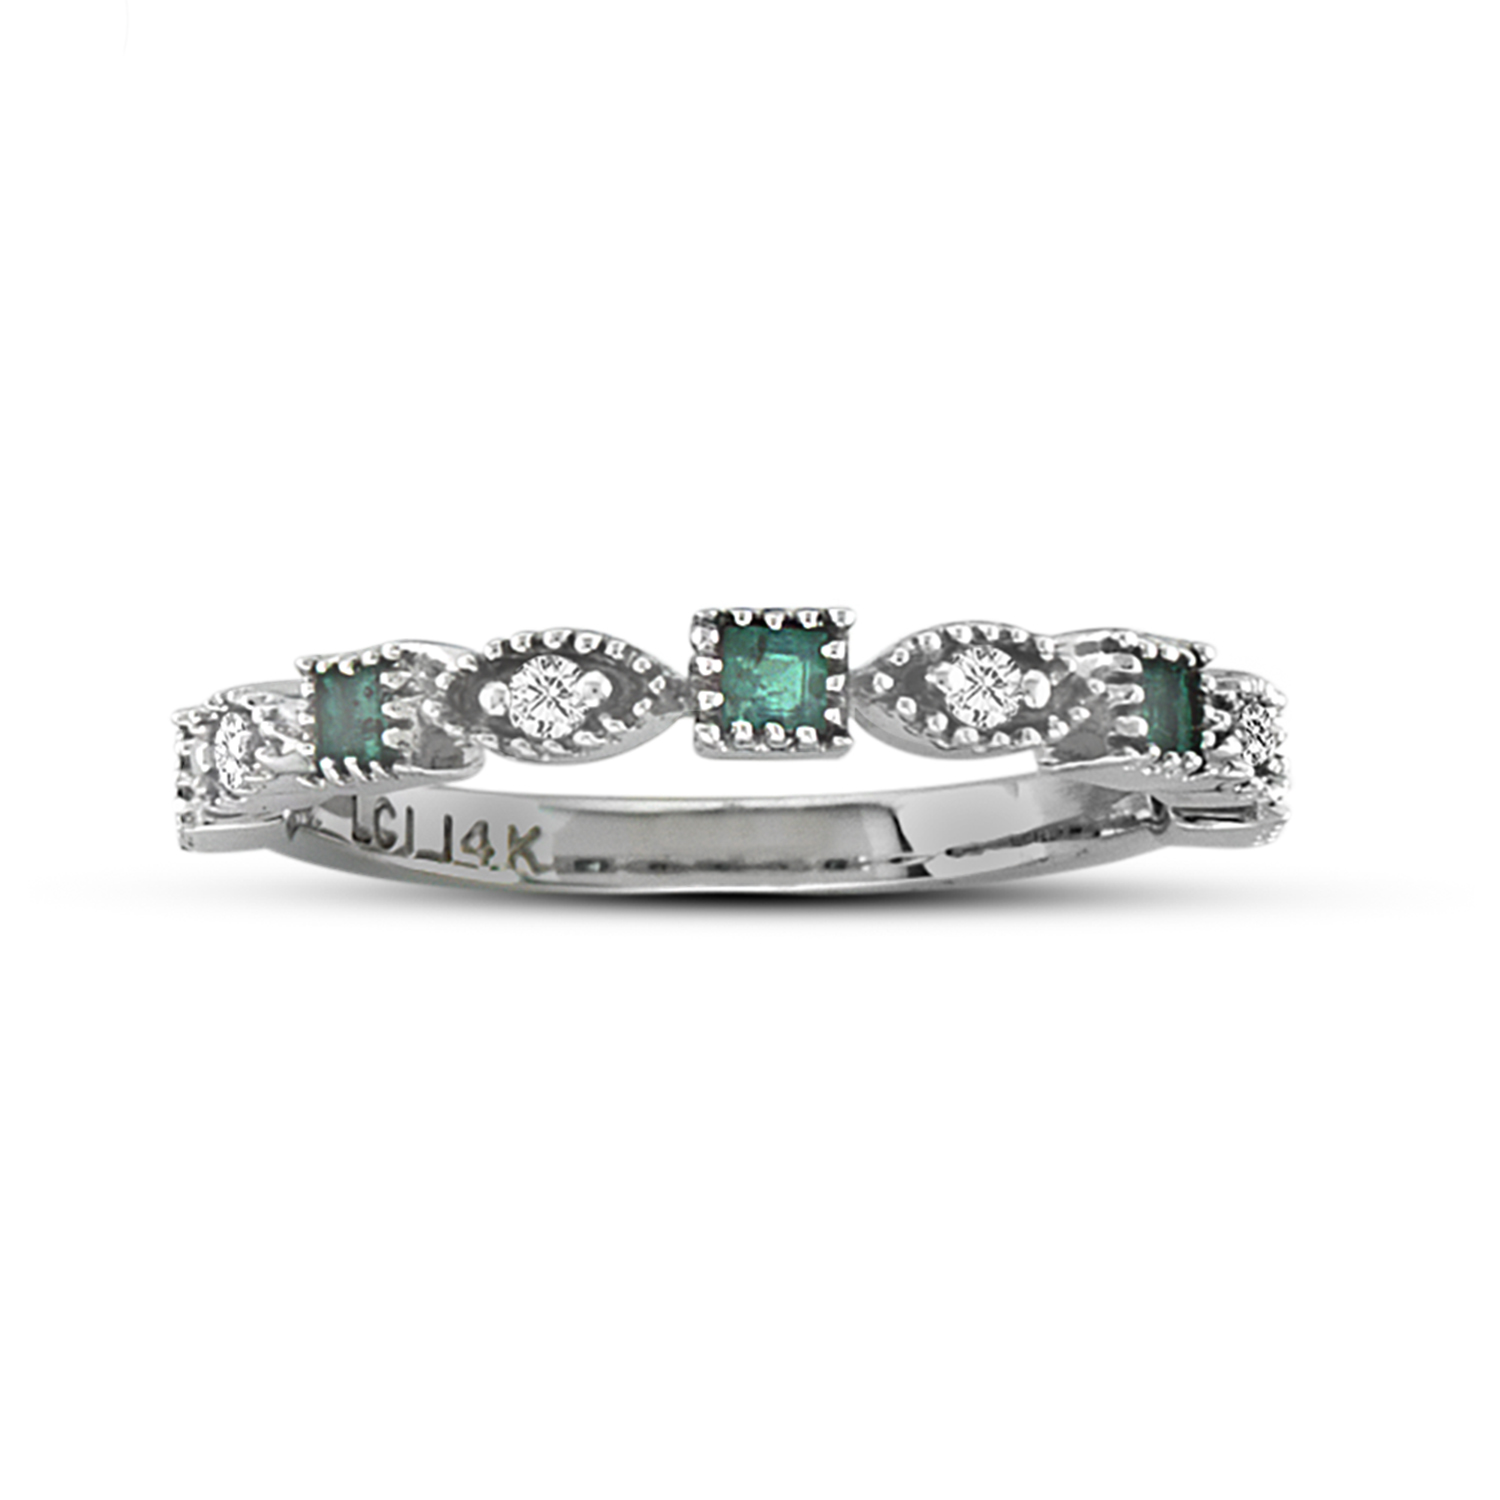 View 0.08ctw Diamond and Emerald Band in 14k Gold